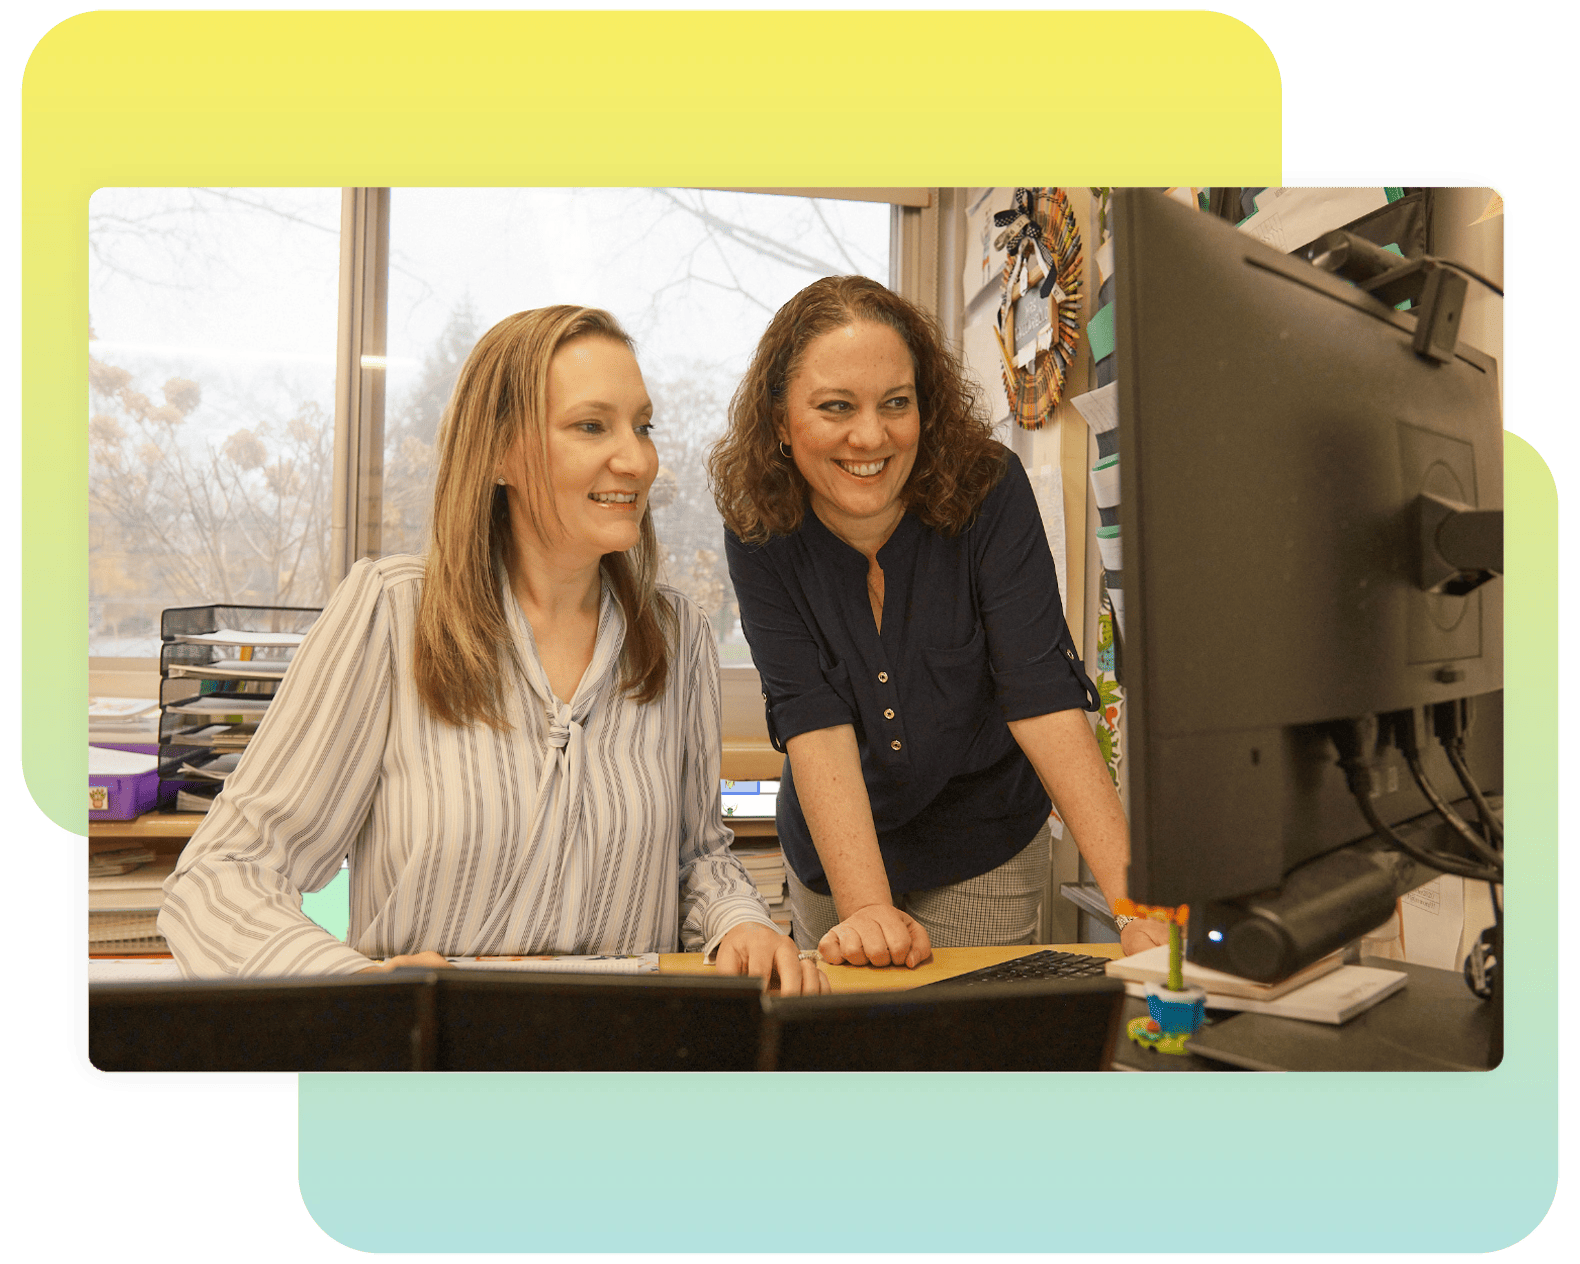 Two women smiling while working together at a computer on New York math in a bright office setting.